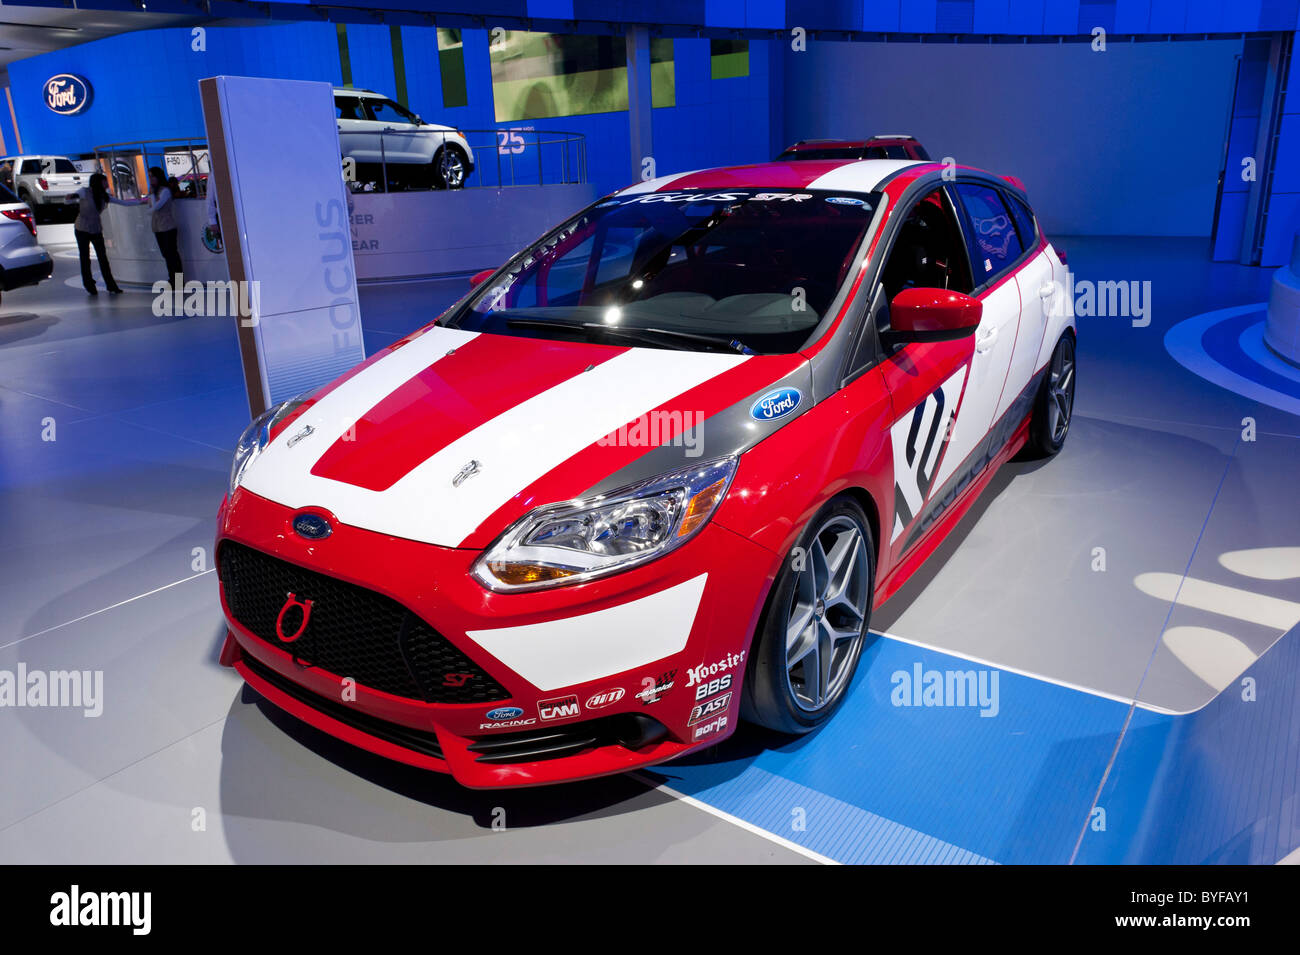 Ford Focus ST-R racecar at the 2011 North American International Auto Show in Detroit Stock Photo